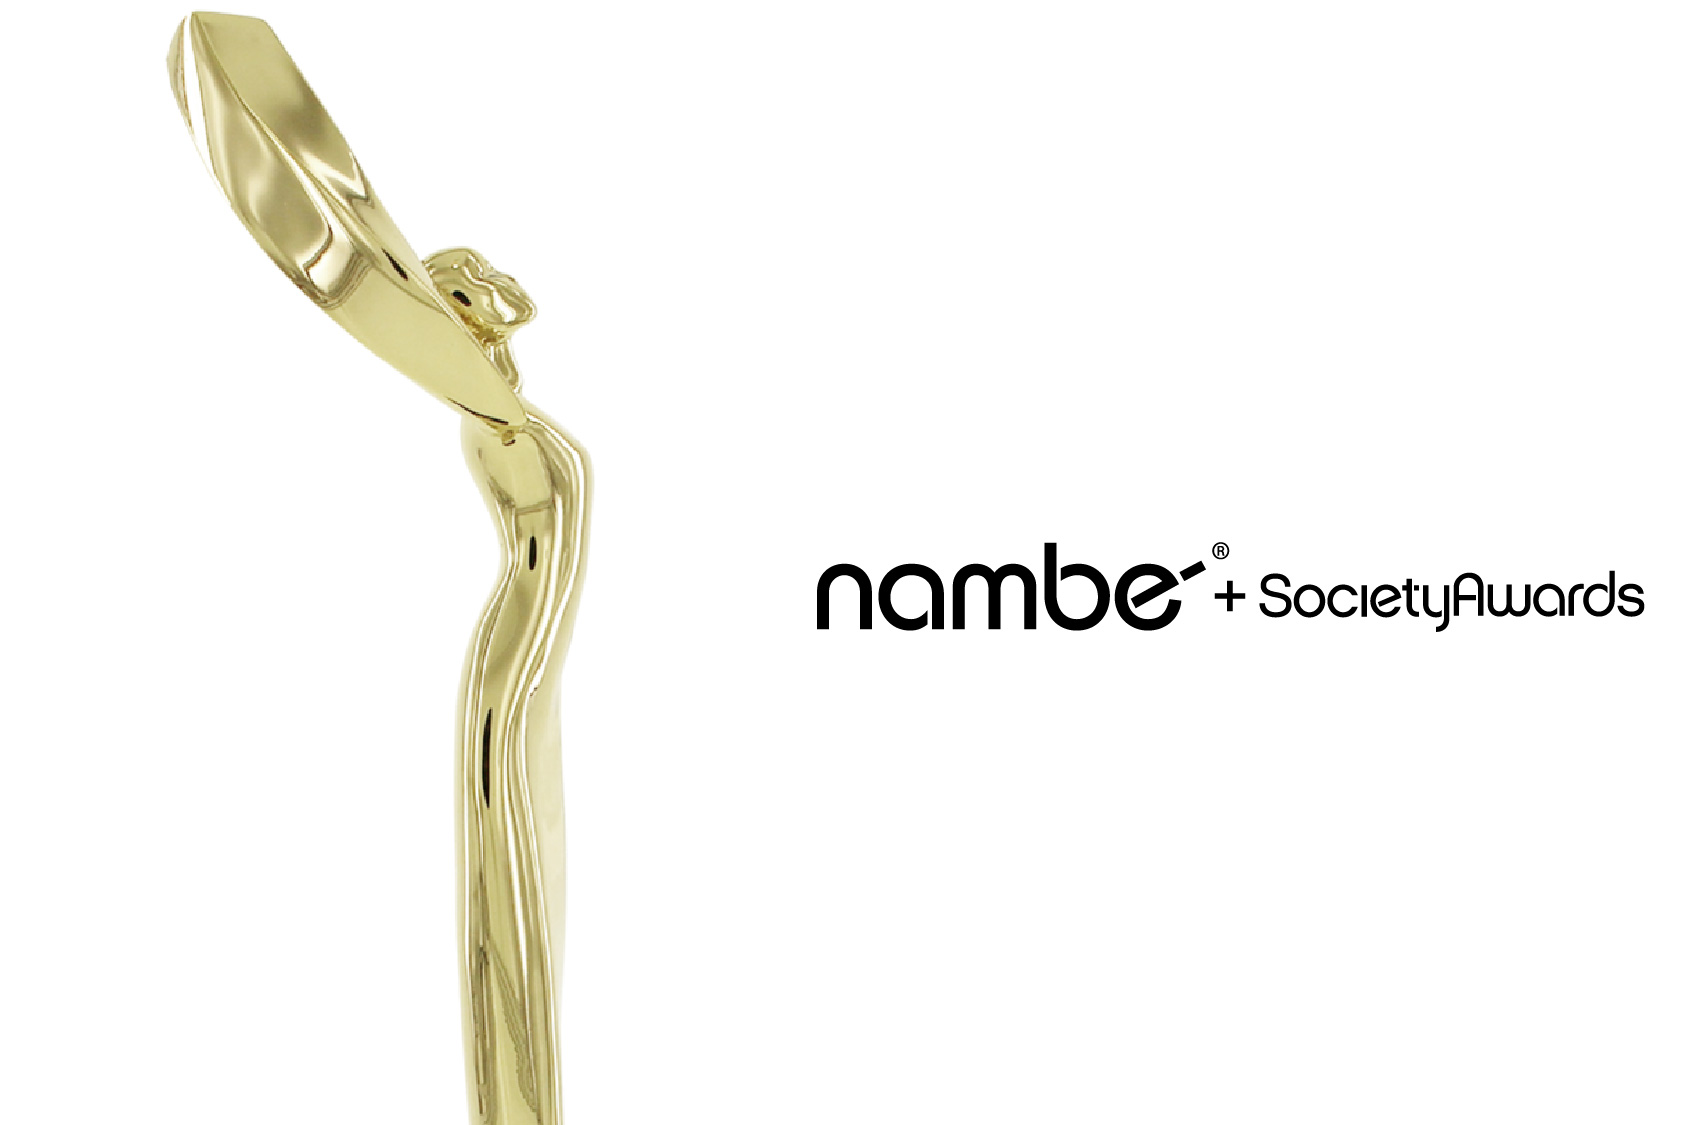 Close up side view of Gold Nambé Angel Trophy